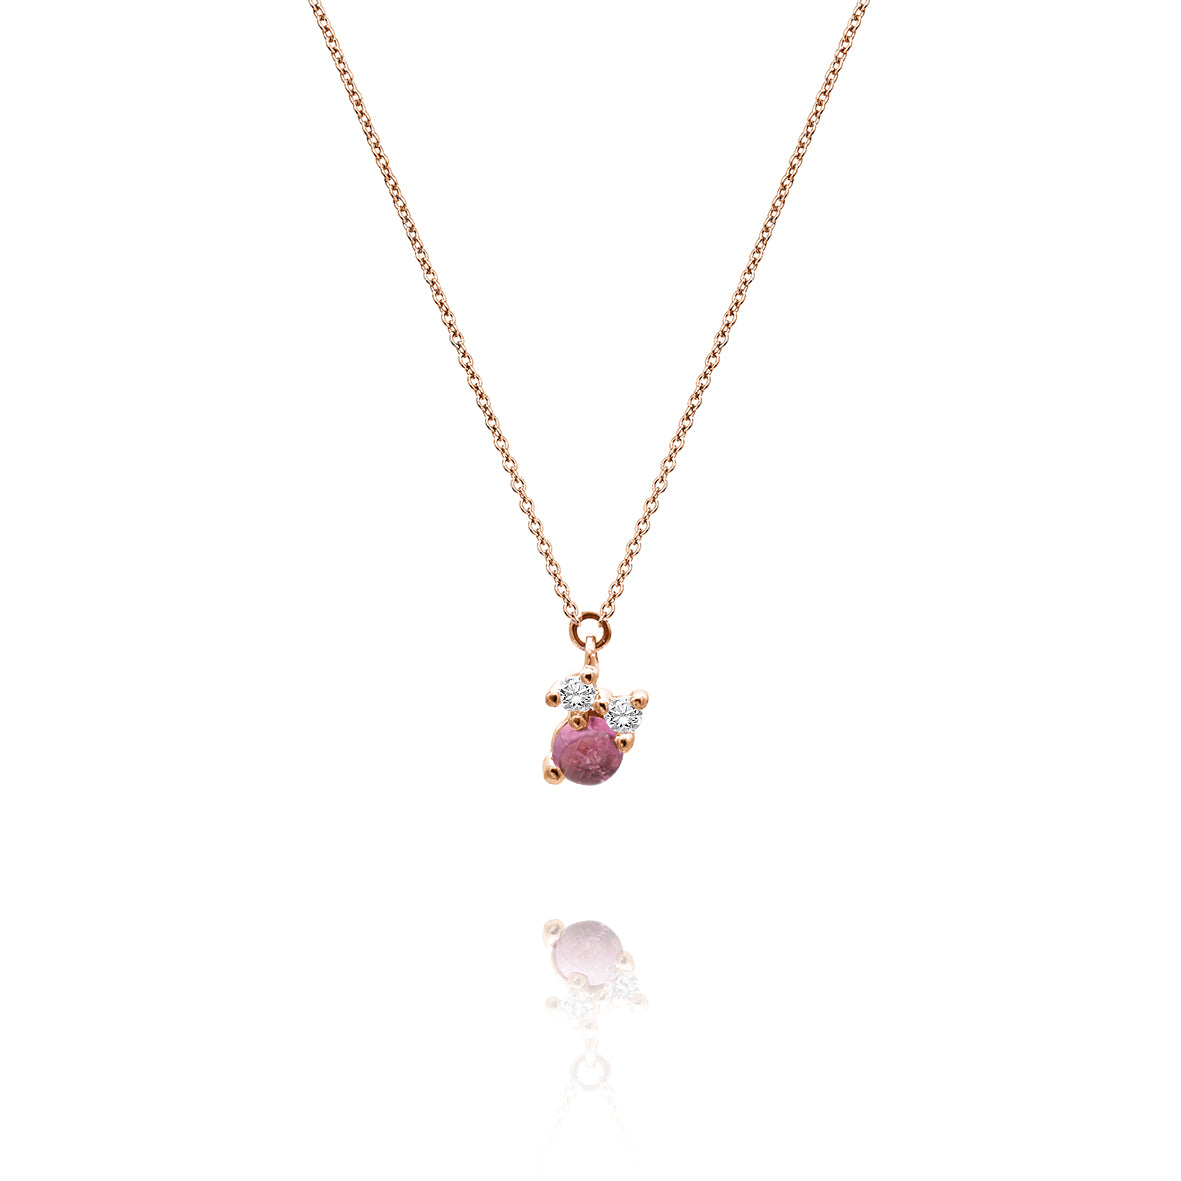 Stellini pendant "smal" in 585/- gold with pink tourmaline